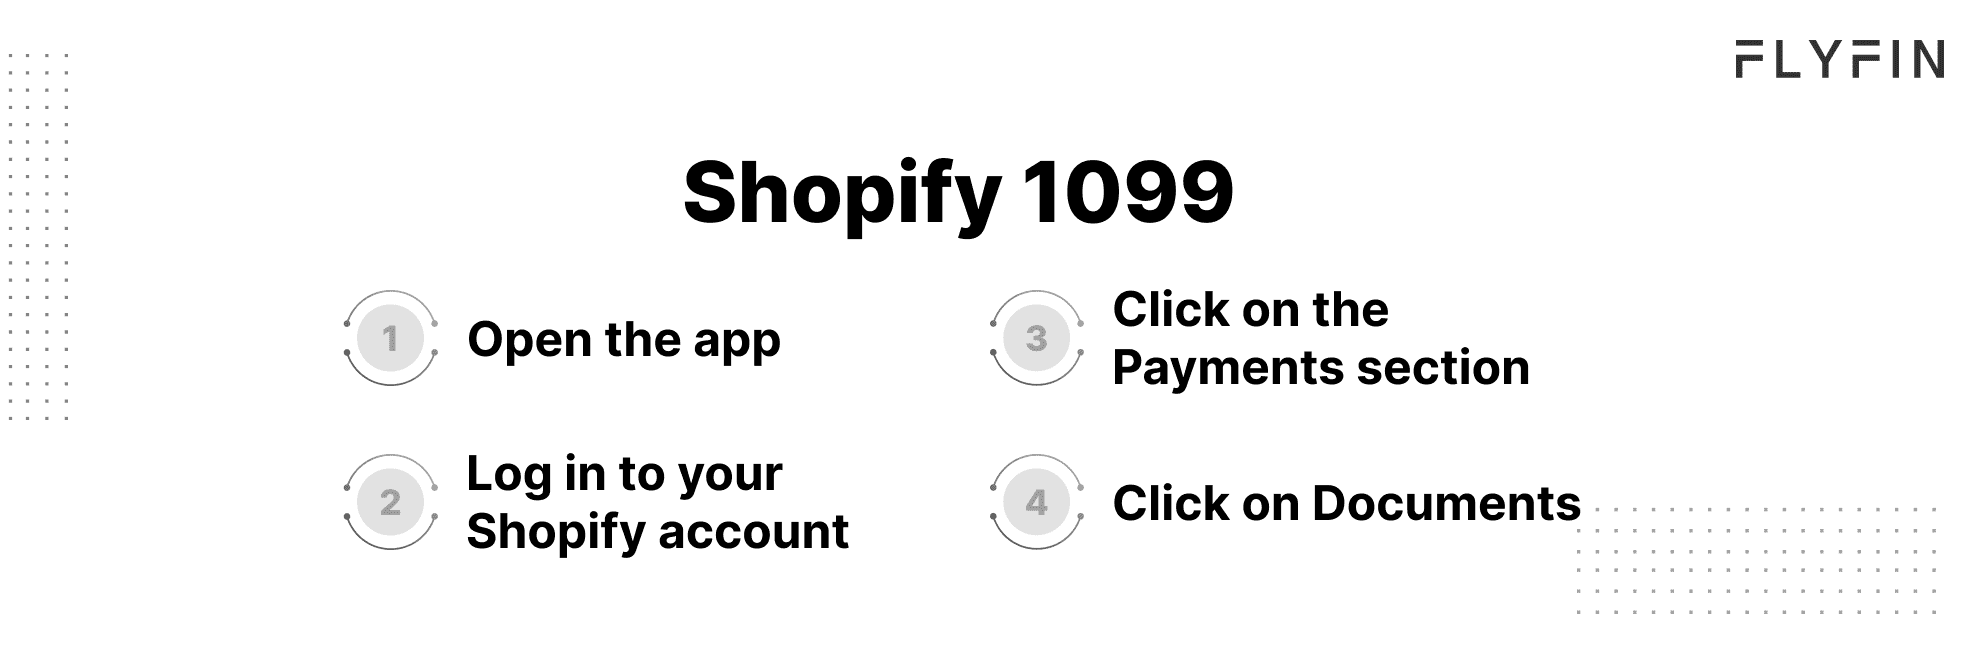 Instructions to access Shopify 1099 form. Steps include opening the app, logging in, clicking on payments section, and accessing documents. No mention of self-employment, freelancer or taxes.